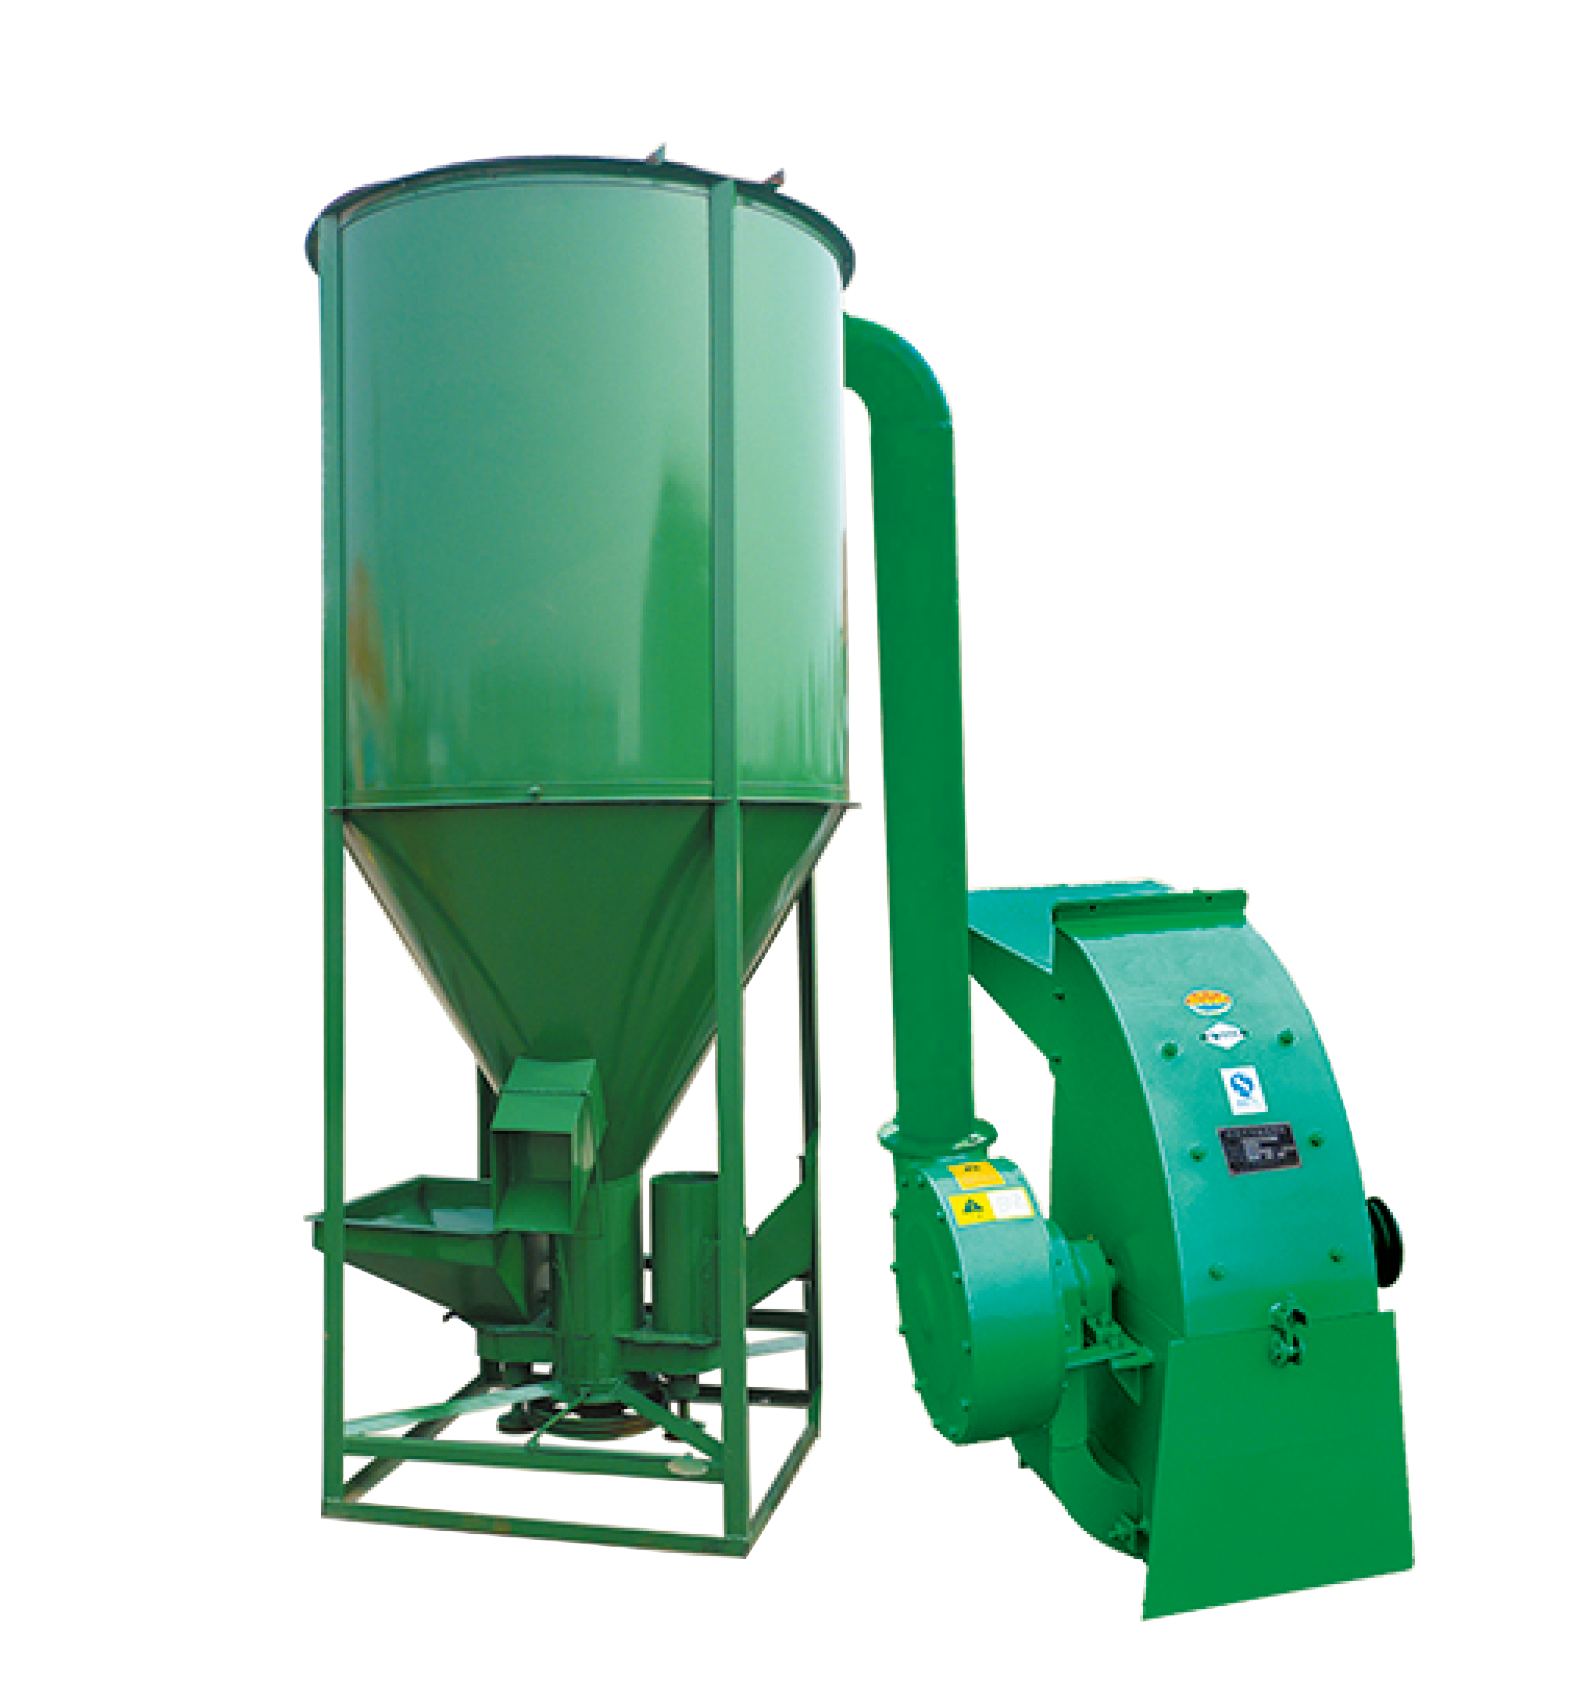 2ton/hour Feed grinder & mixer machine for animal feed, cattle, sheep, fish and so on.